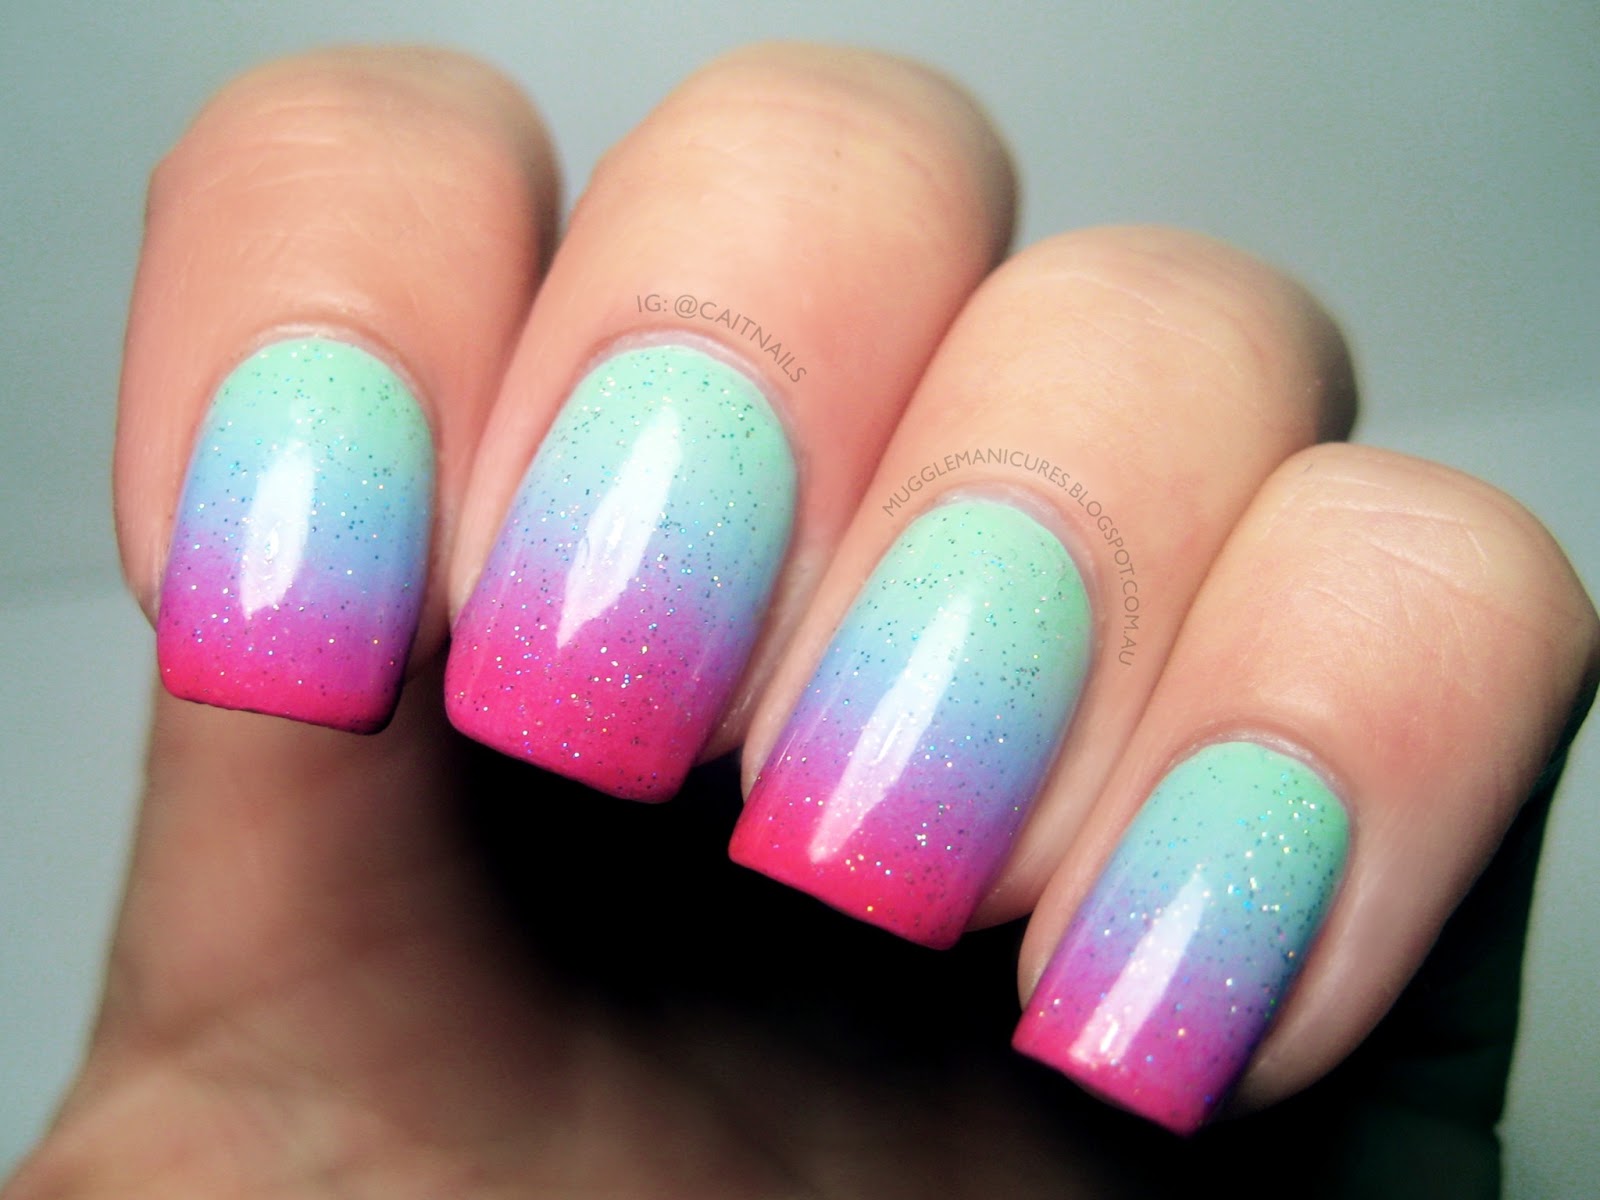 4. Pastel Nail Tips - wide 2